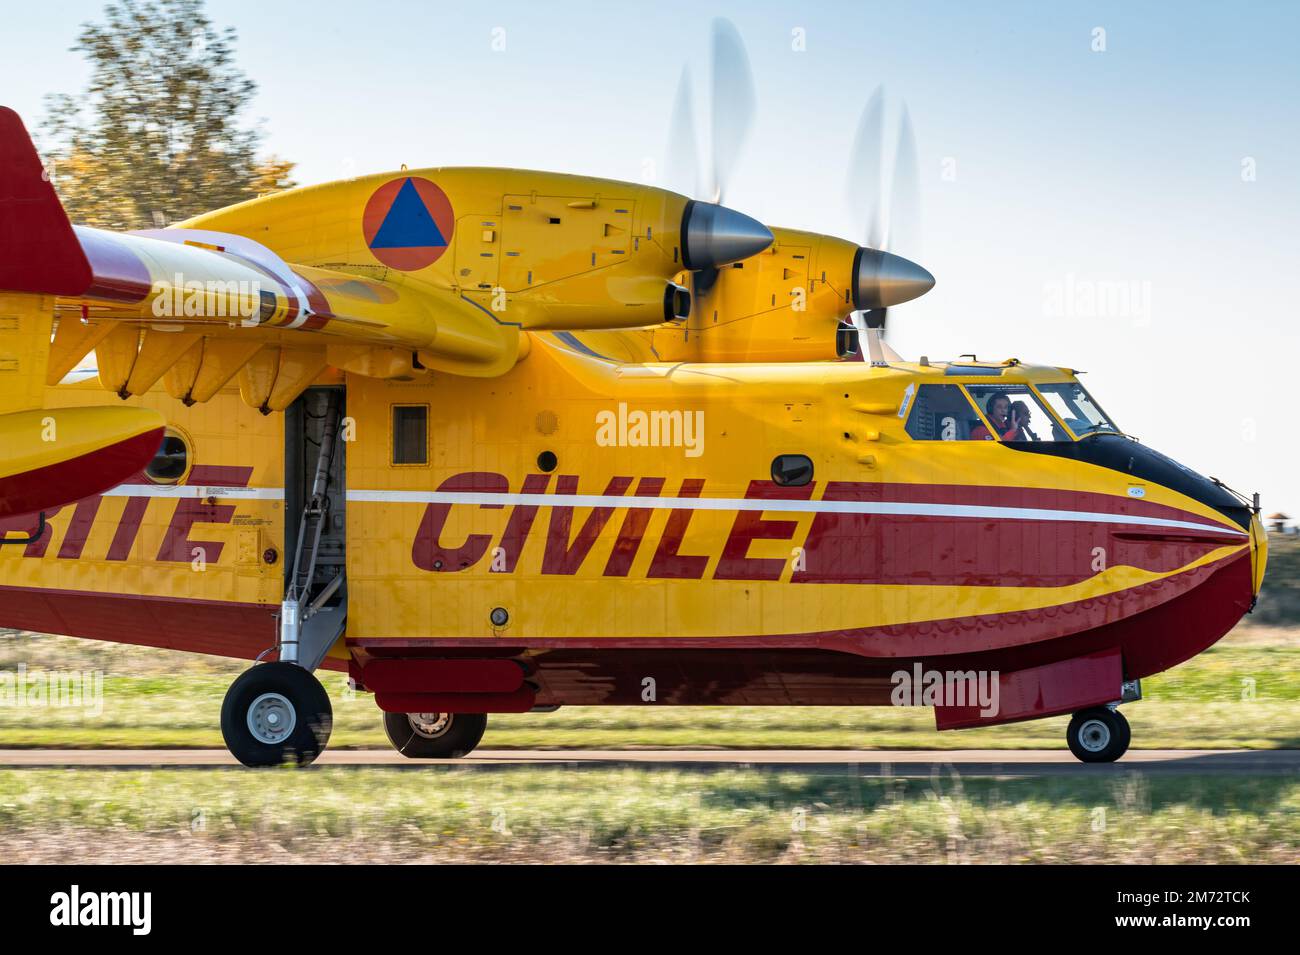 A Canadair CL-415 amphibious aircraft for aerial firefighting of the French Sécurité Civile to combat wildfires. Stock Photo